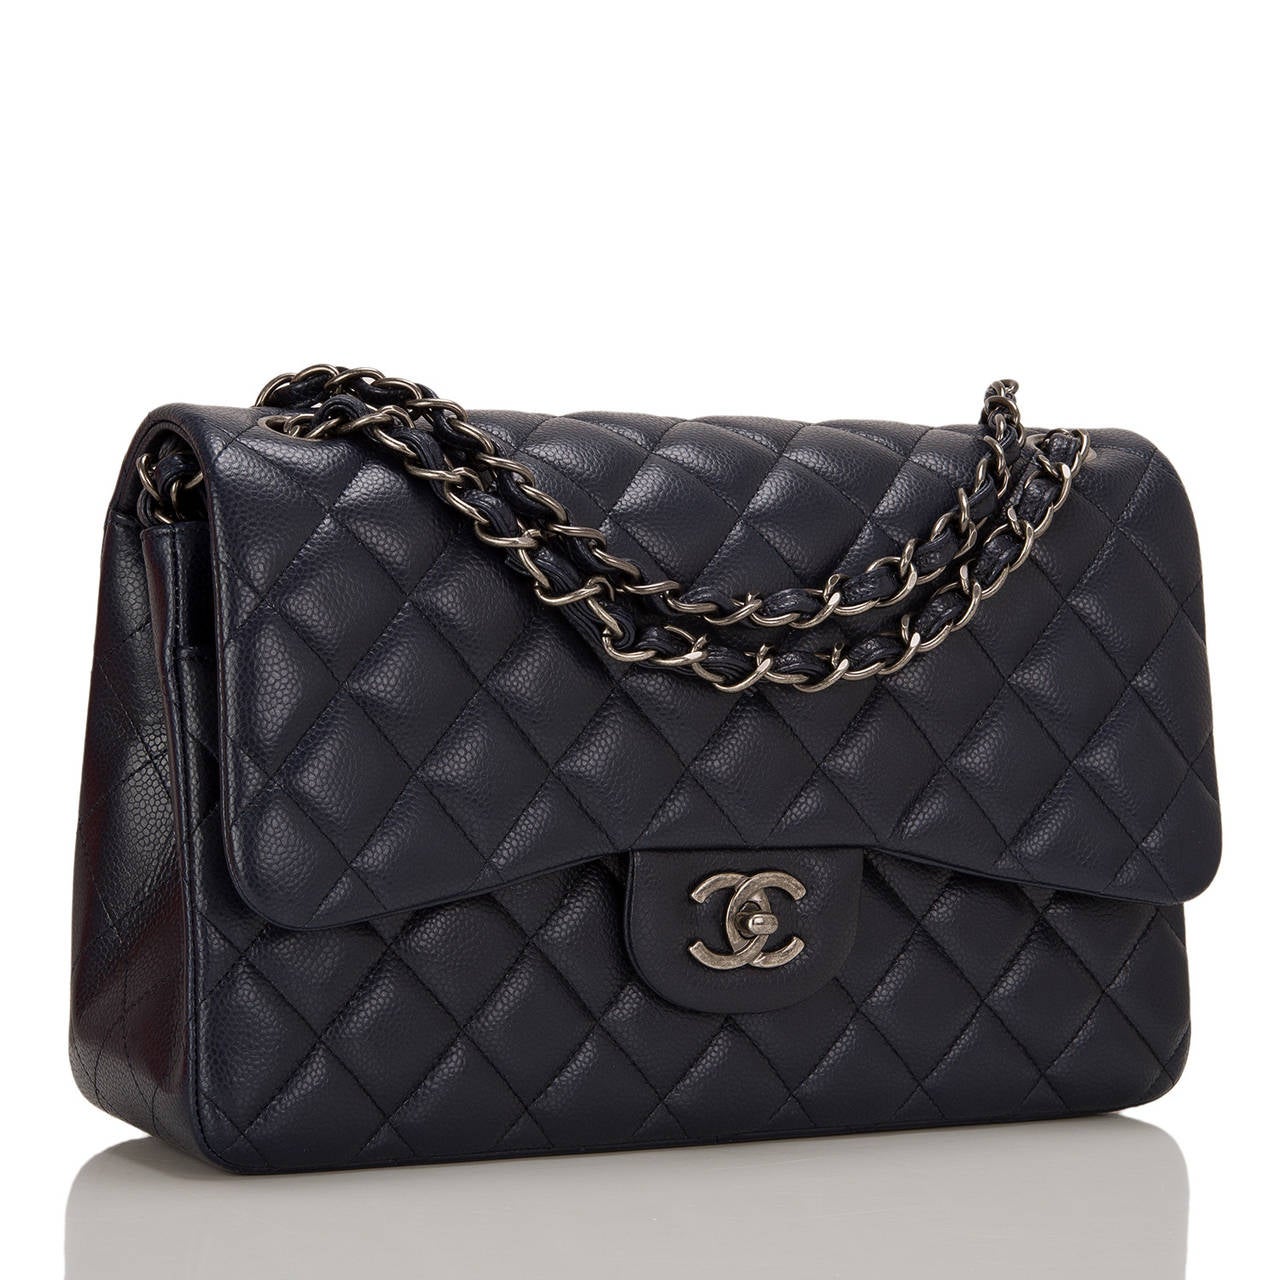 Chanel navy quilted caviar Jumbo Classic double flap bag with aged ruthenium hardware.

This Jumbo Classic double flap of rich navy caviar leather features a front flap with signature CC turnlock closure, half moon back pocket, and an adjustable